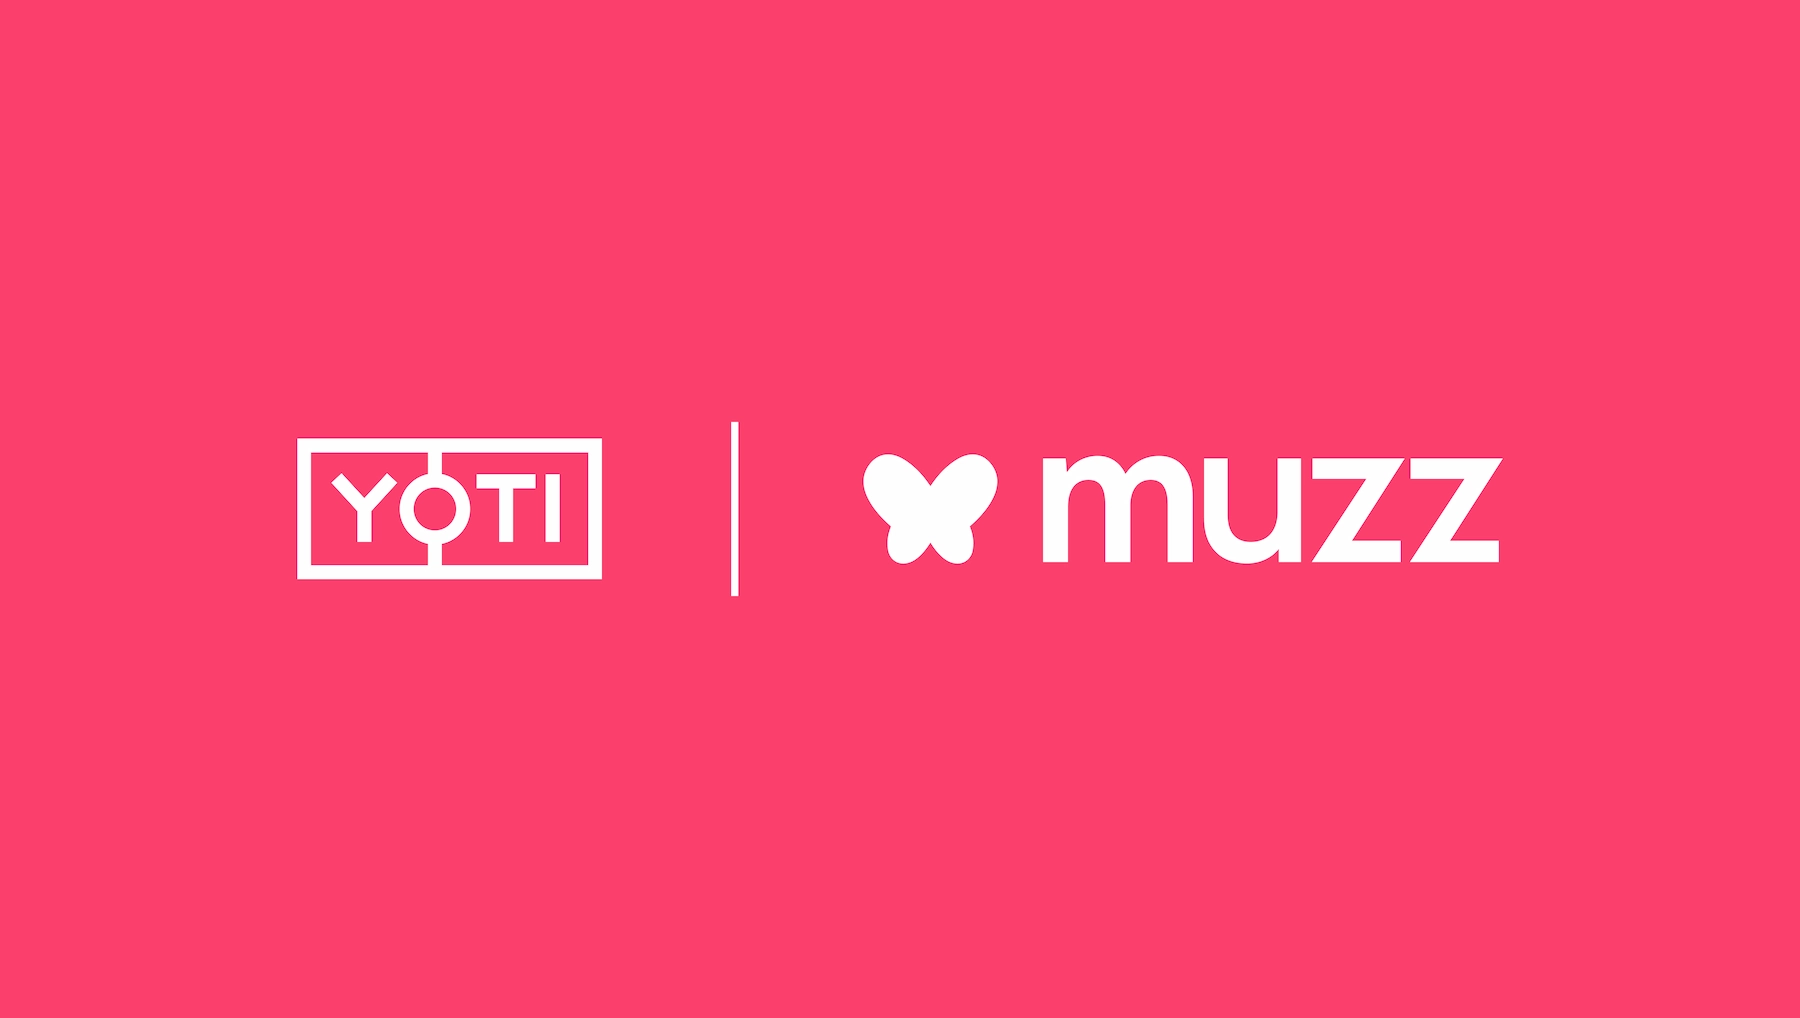 Yoti and Muzz logos presented together